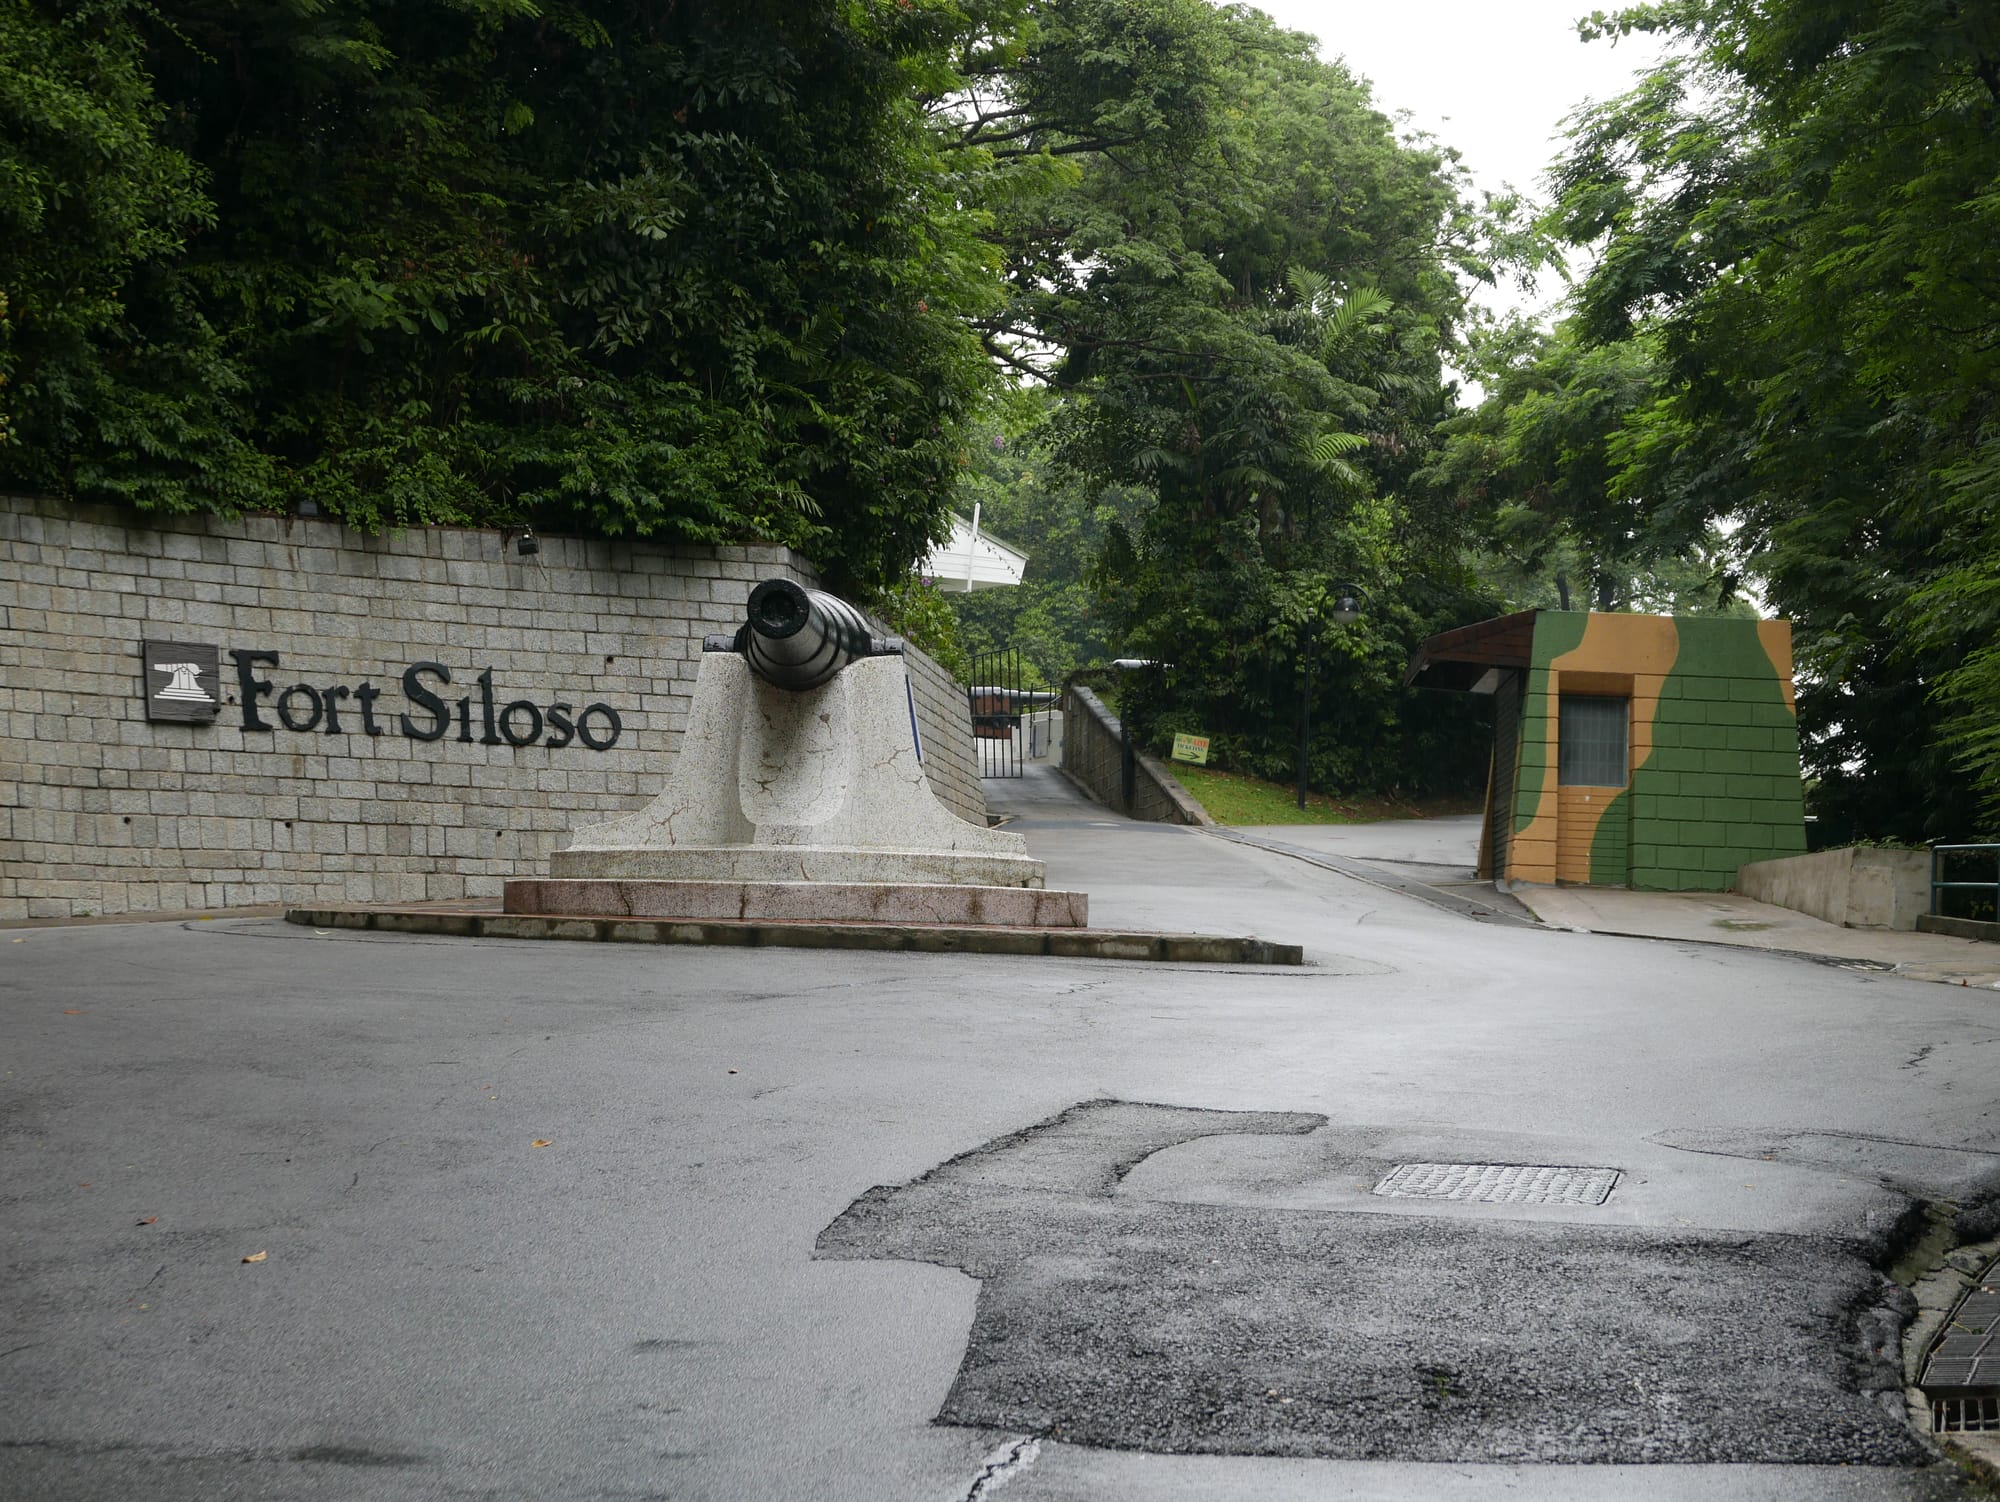 Photo by Author — the entrance to Fort Siloso, Singapore